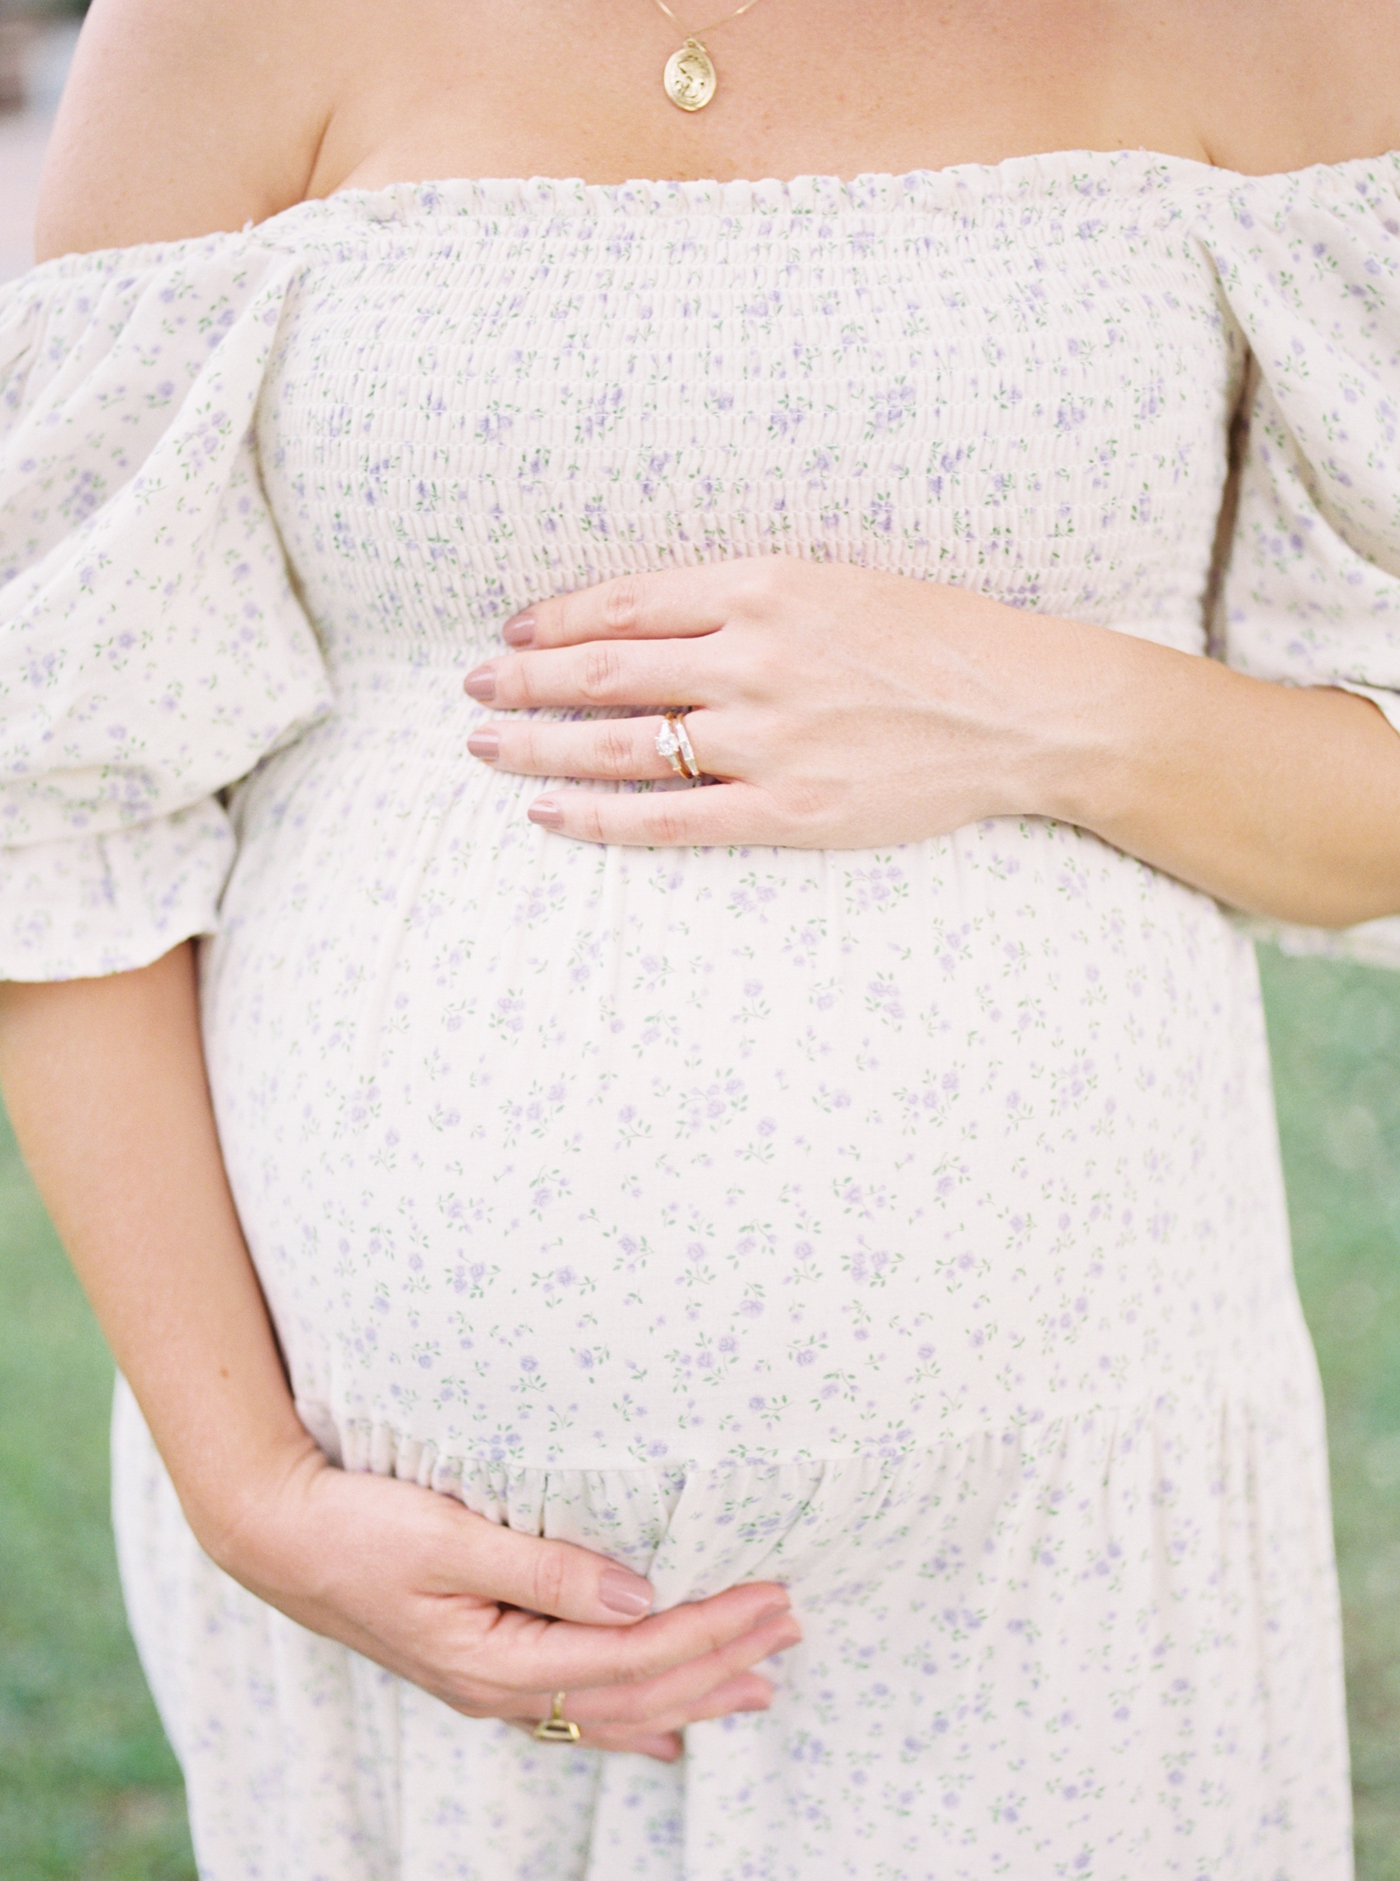 Expectant mom holding her belly wearing a floral print dress | Photo by Caitlyn Motycka Photography.